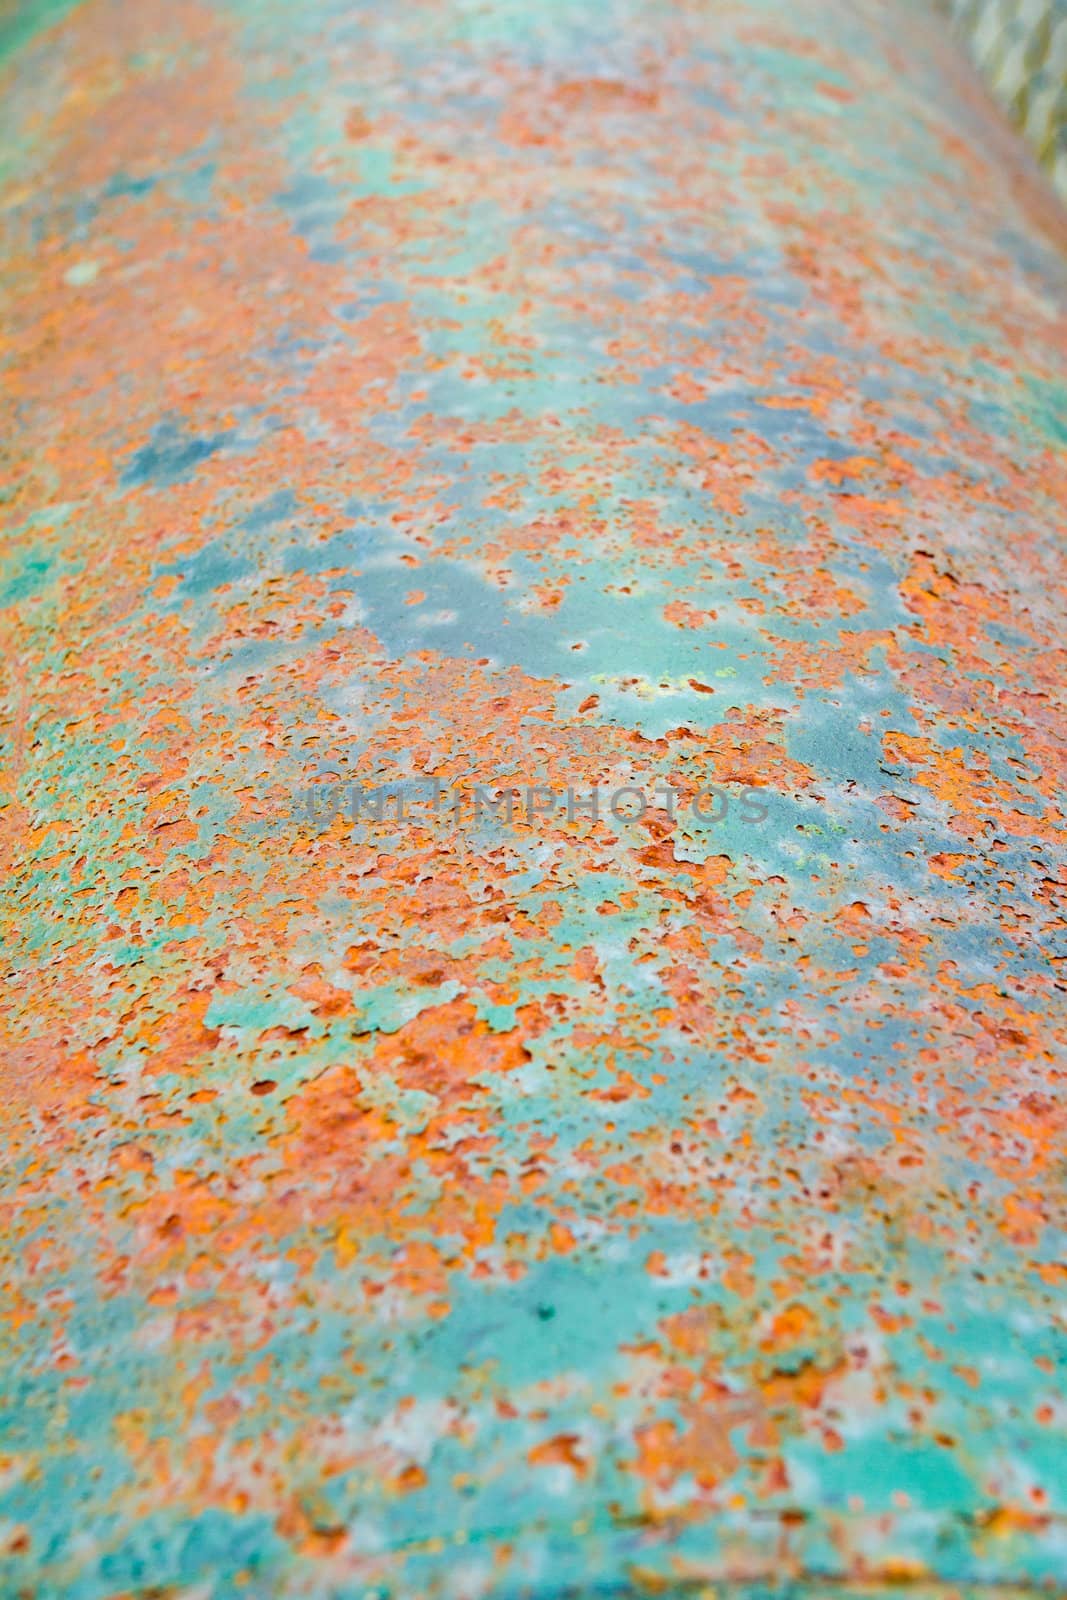 Various textures are photographed in an abstract way to create a textural background image.